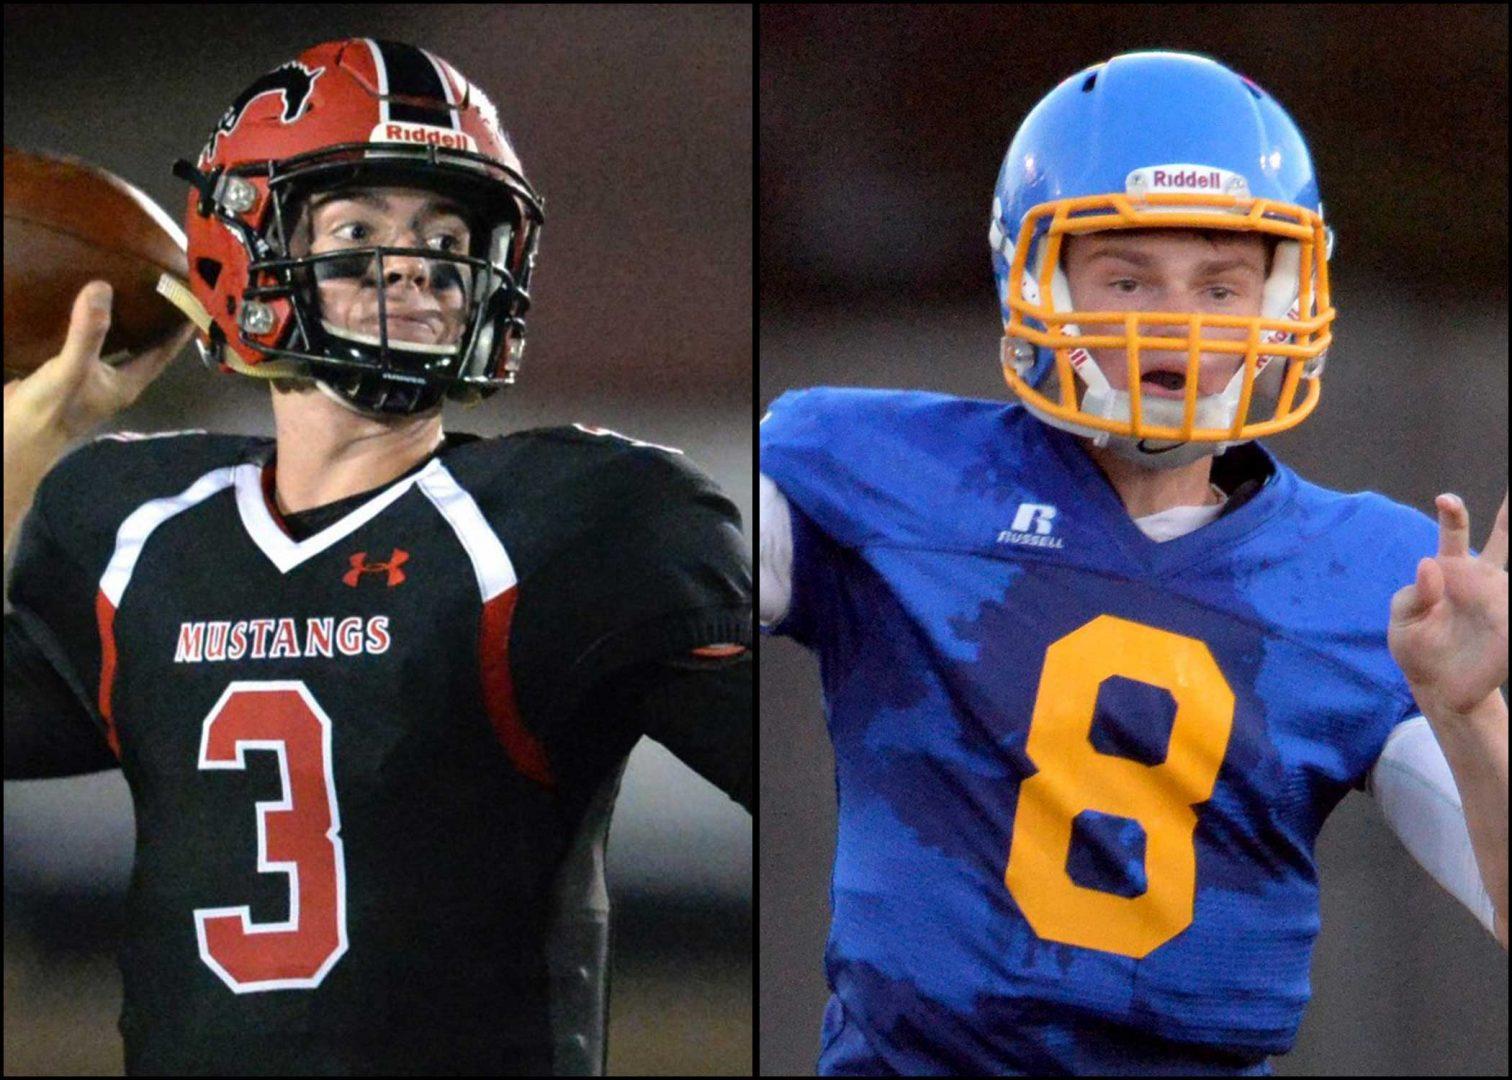 Jake Haener (Monte Vista, left) and Ben Wooldridge (Foothill, right) shared similar career accomplishments in high school, such as leading their teams to the NCS championship finals. (Photos courtesy of Doug Duran/Bay Area News Group)